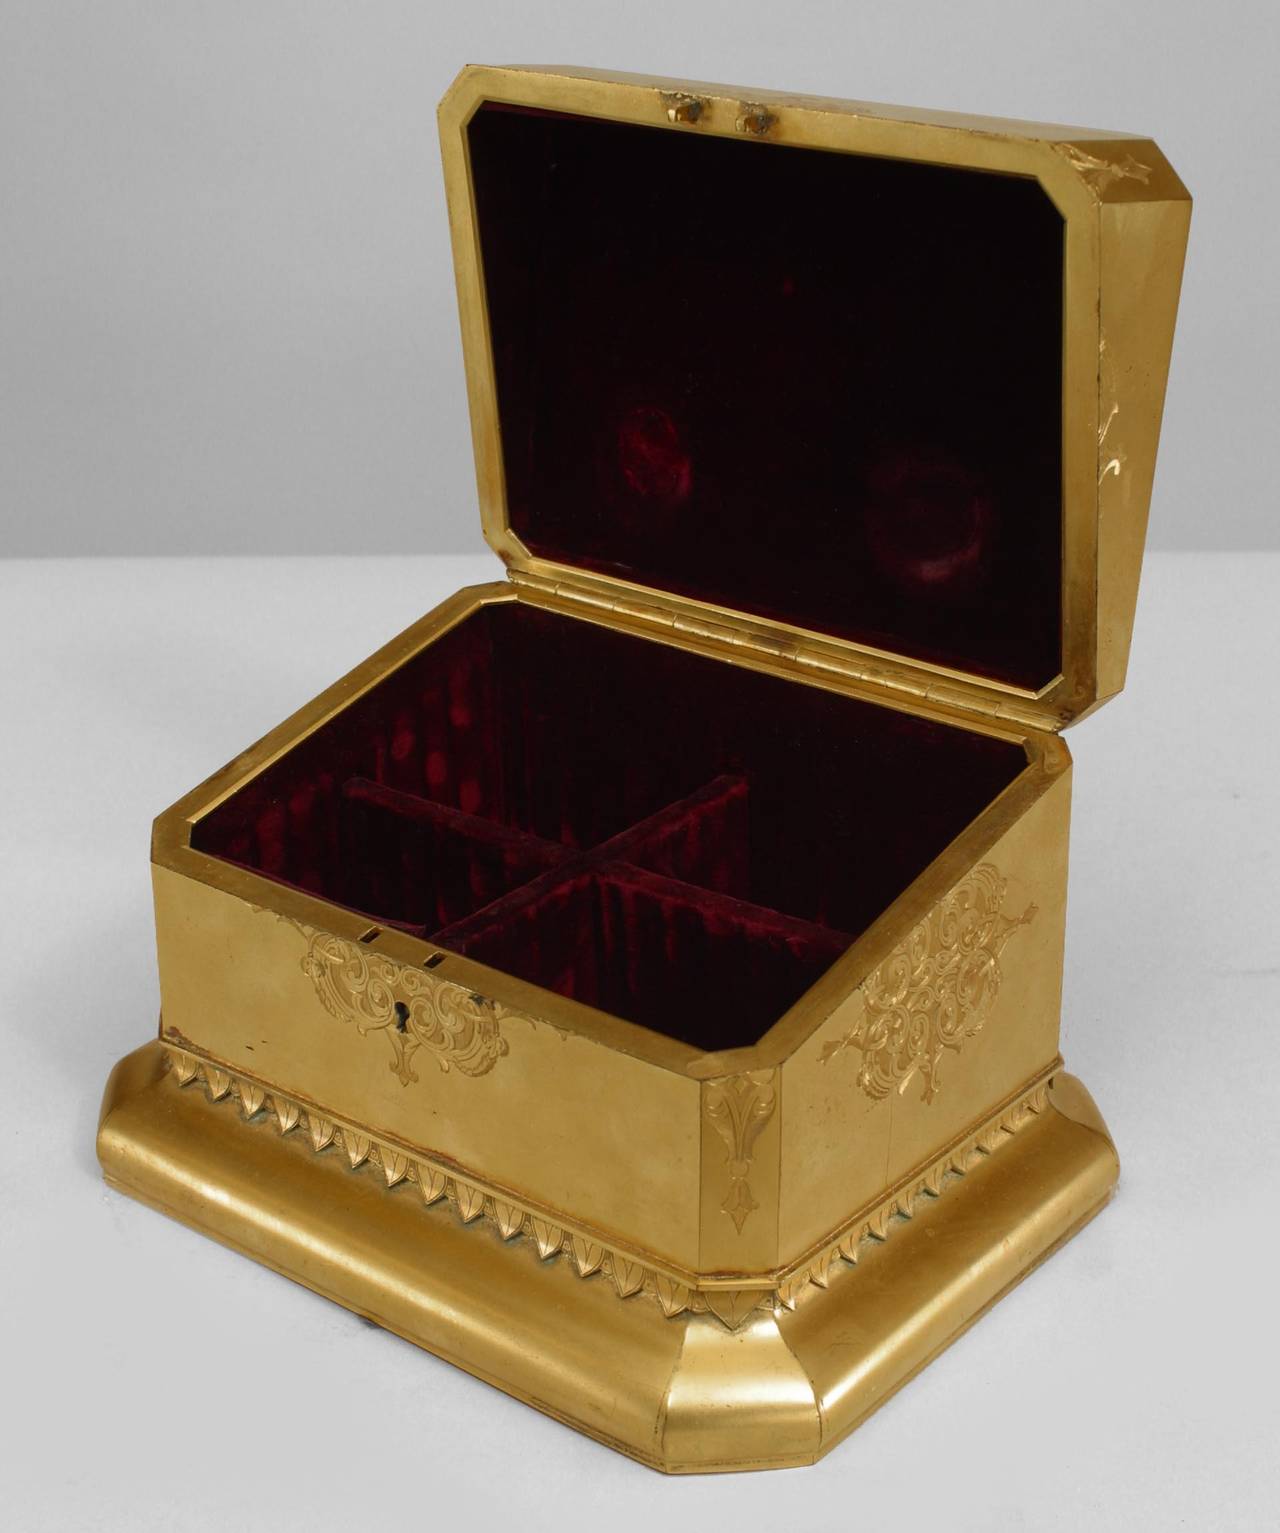 19th Century French Louis XV style rectangular bronze dore box with etched designs and a coral cameo top depicting a woman. Interior has four compartments and is lined in purple velvet.